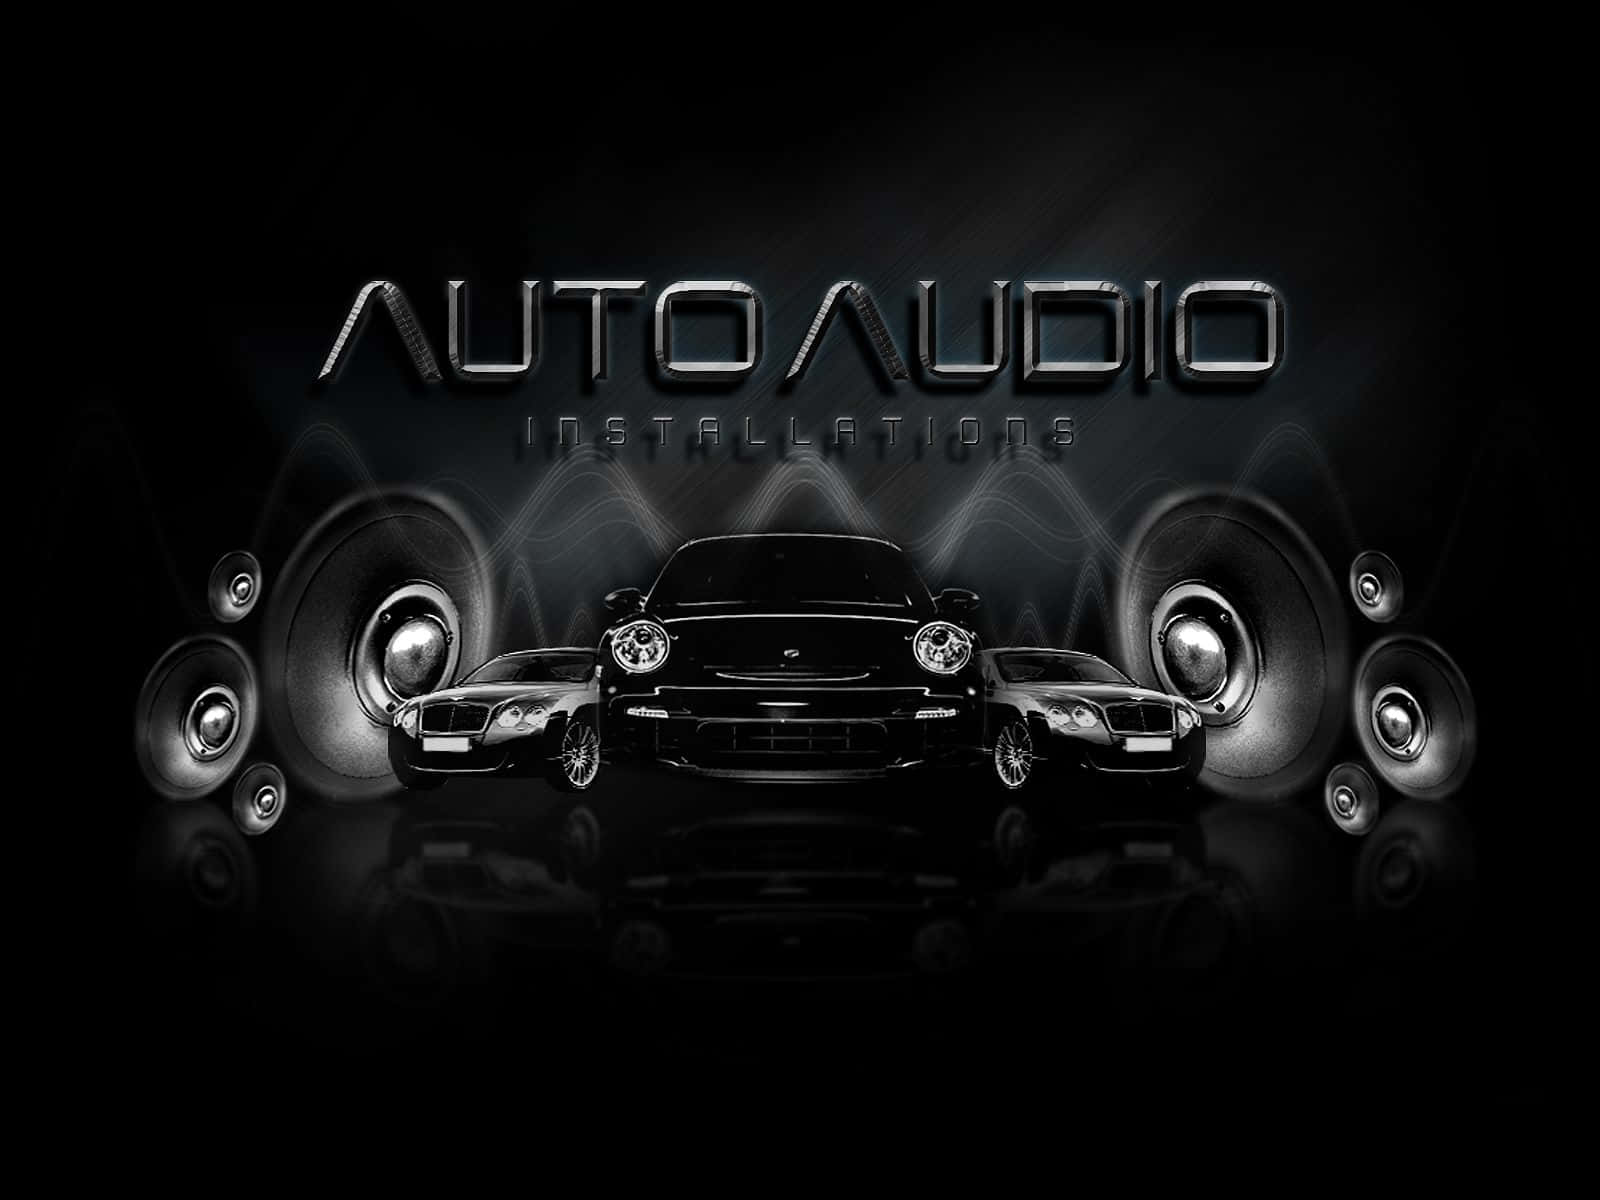 Stylish Car Audio System in Luxury Vehicle Wallpaper